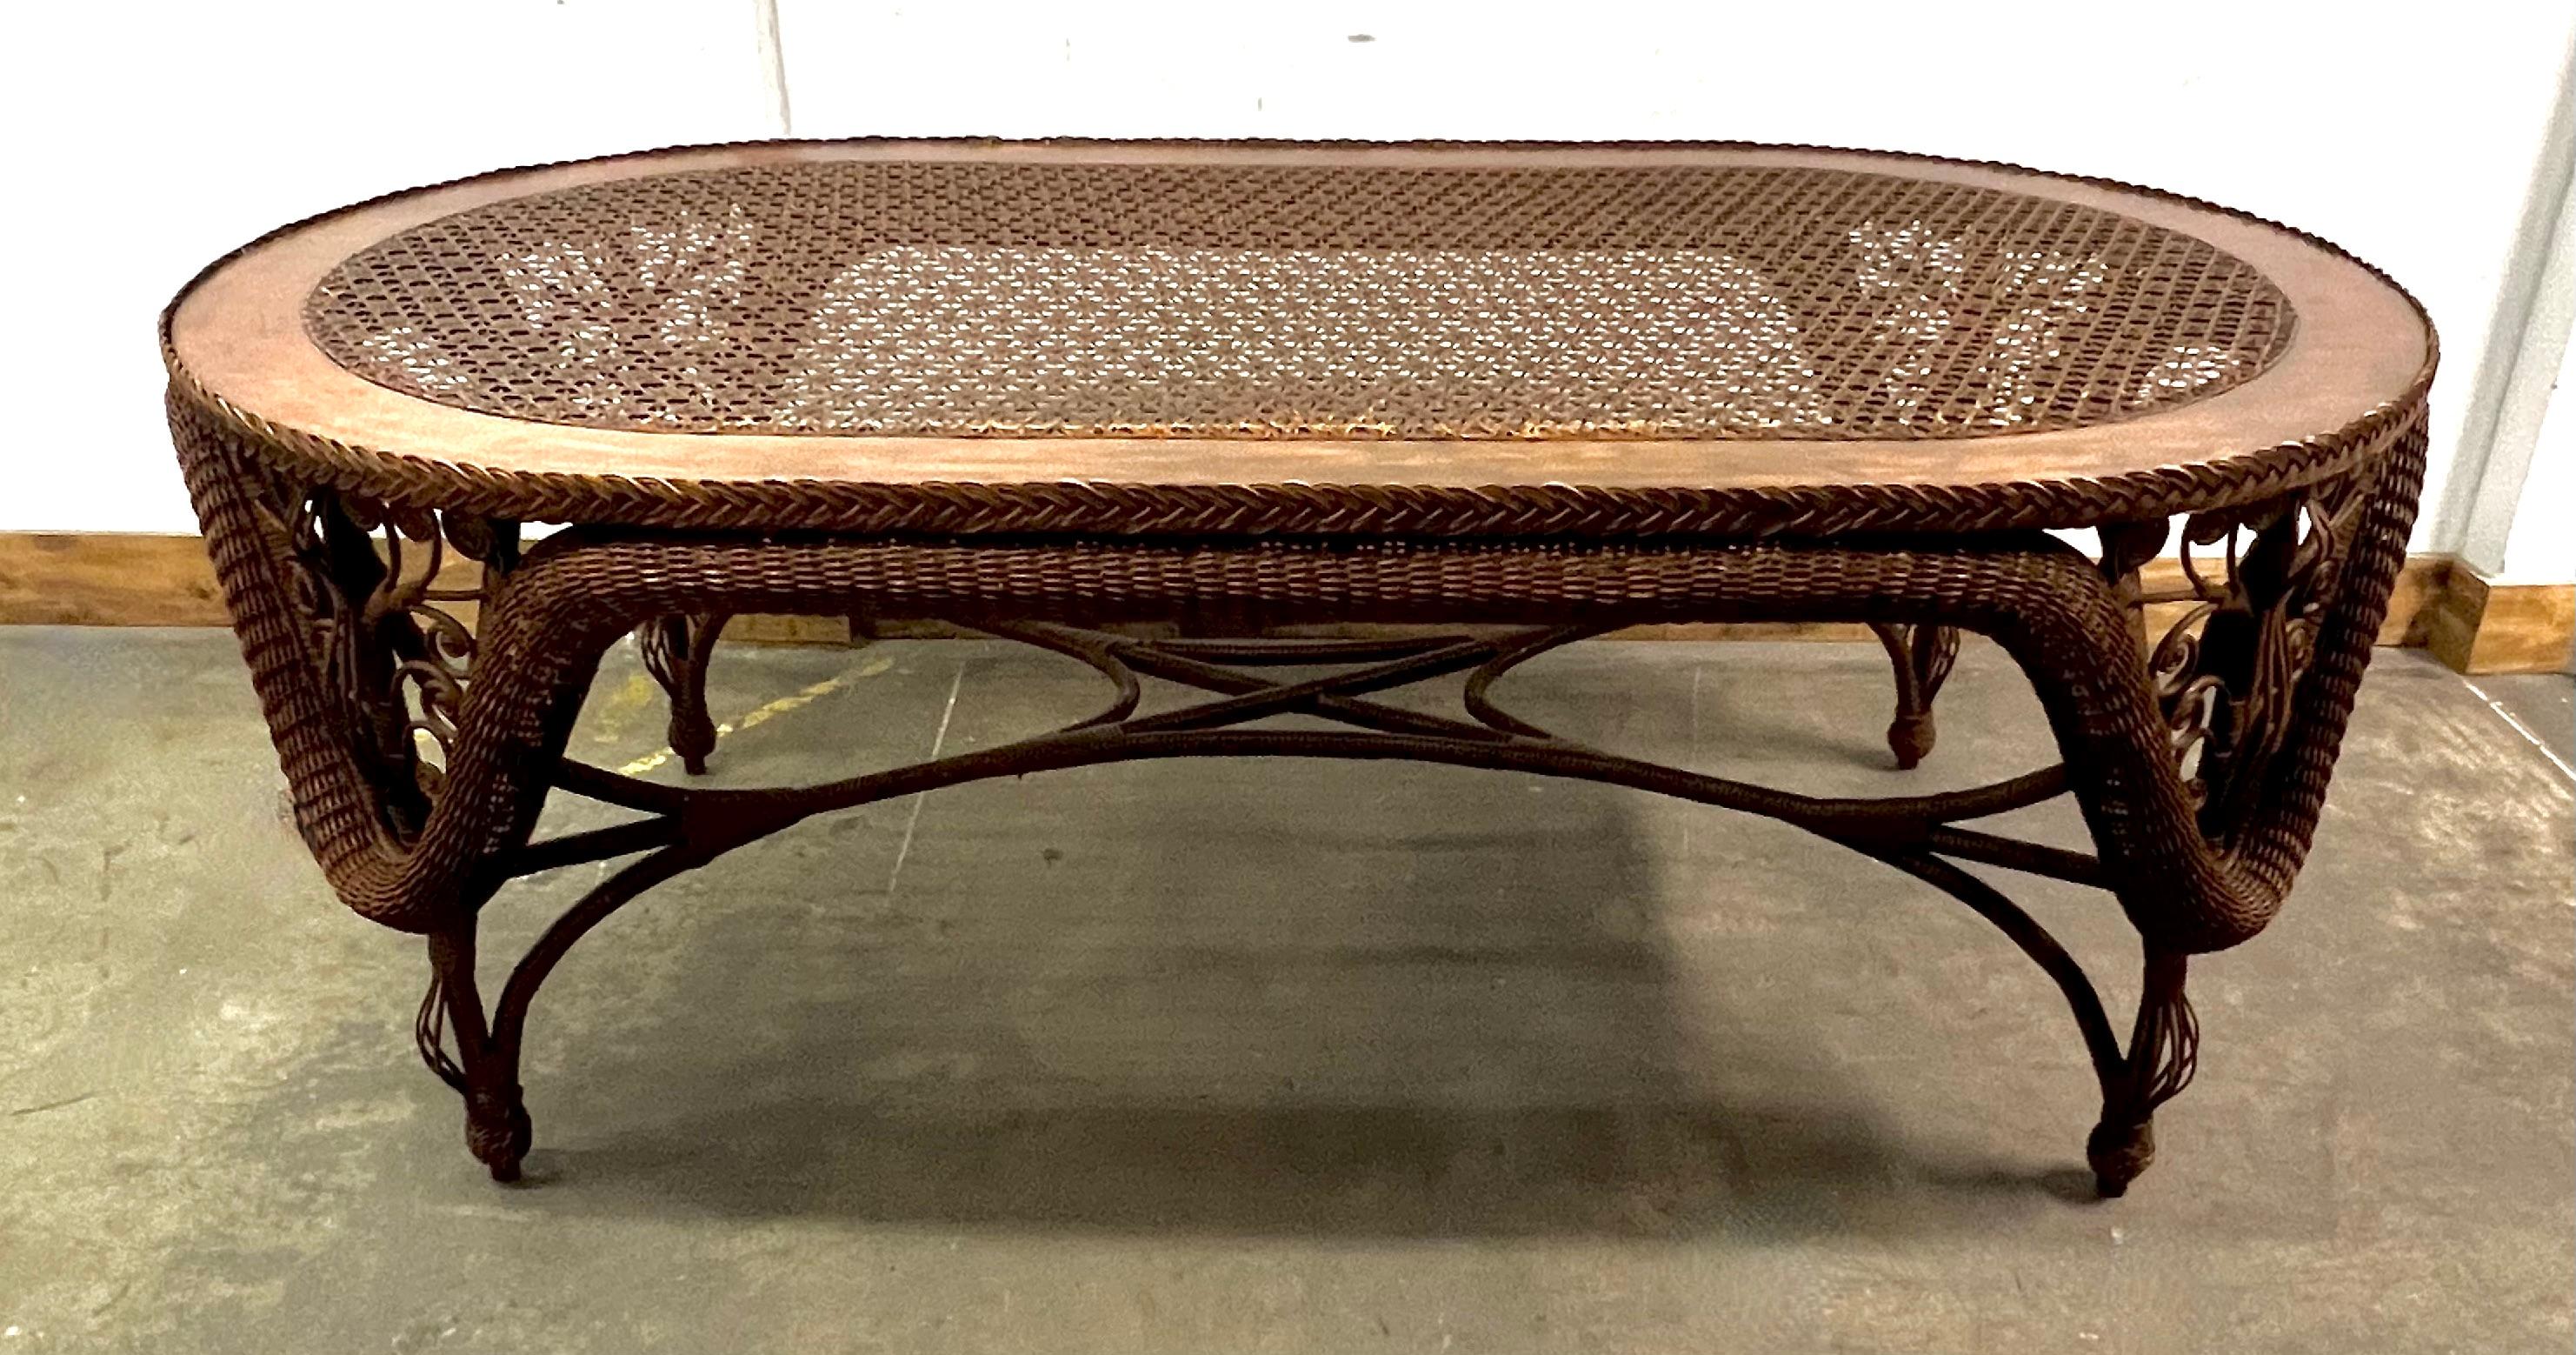 A traditional wicker table and 6 chairs. The wicker is very intricately designed on both the table and chairs. All in good condition for the age, which we believe to be mid 20th century. The Table has a custom cut piece of glass.

The color is a